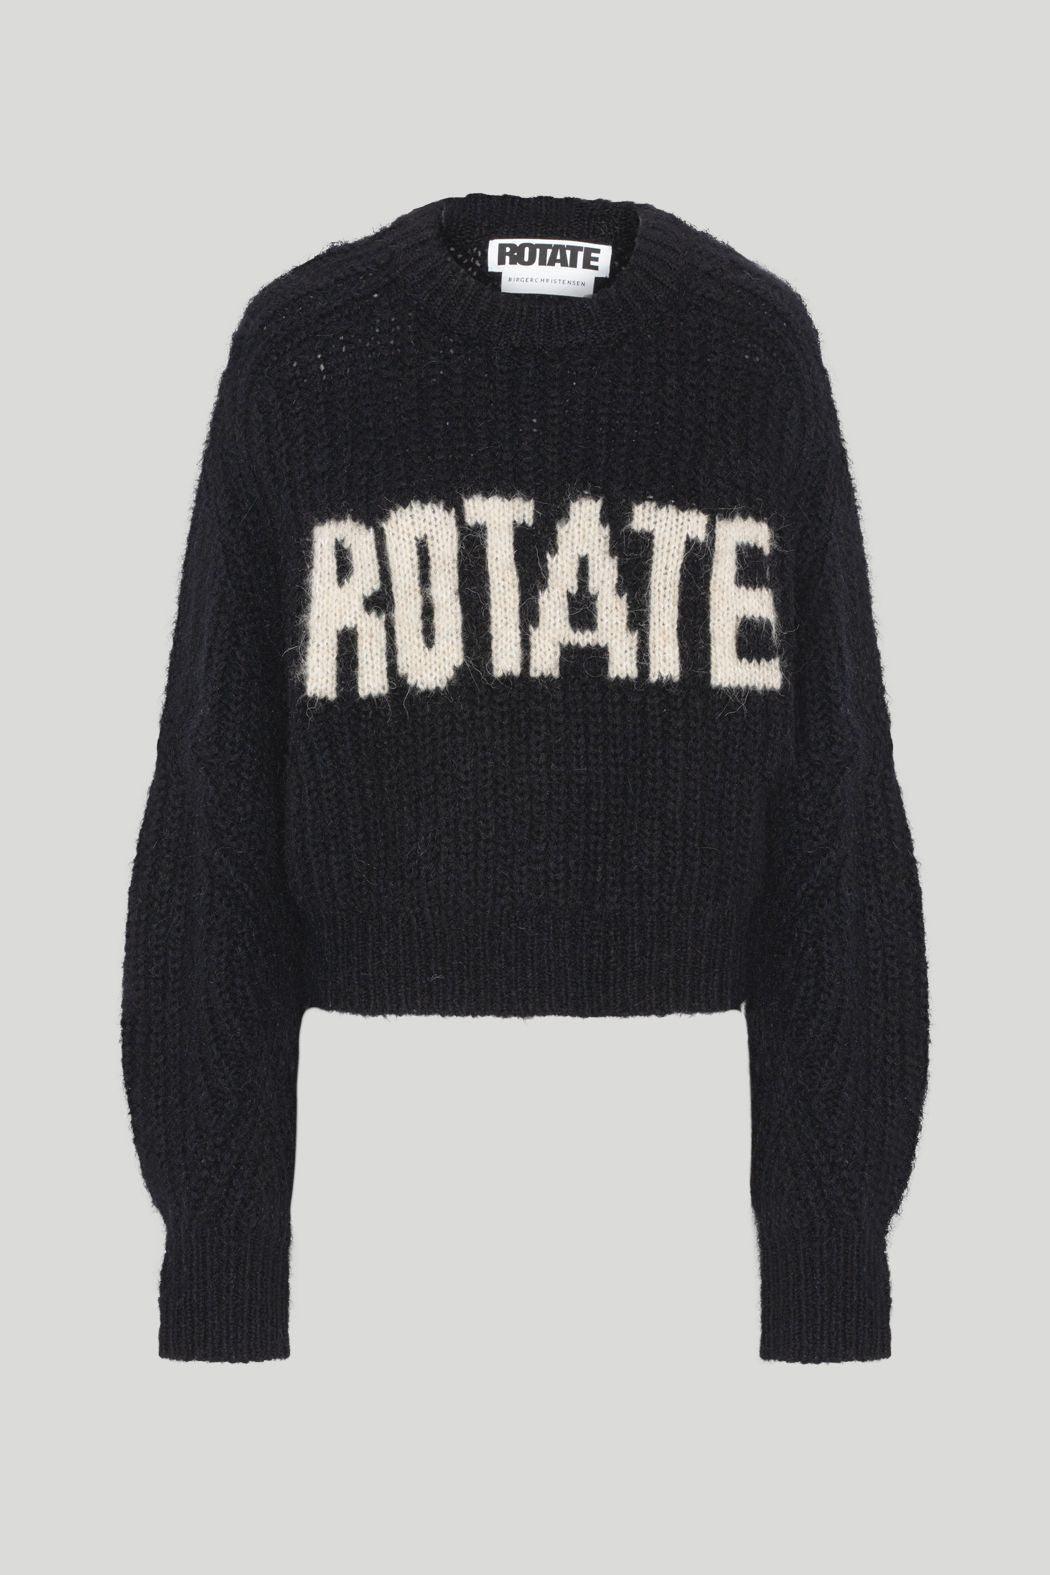 Rotate Remain - Shandy Black Logo Knit - 32 The Guild 